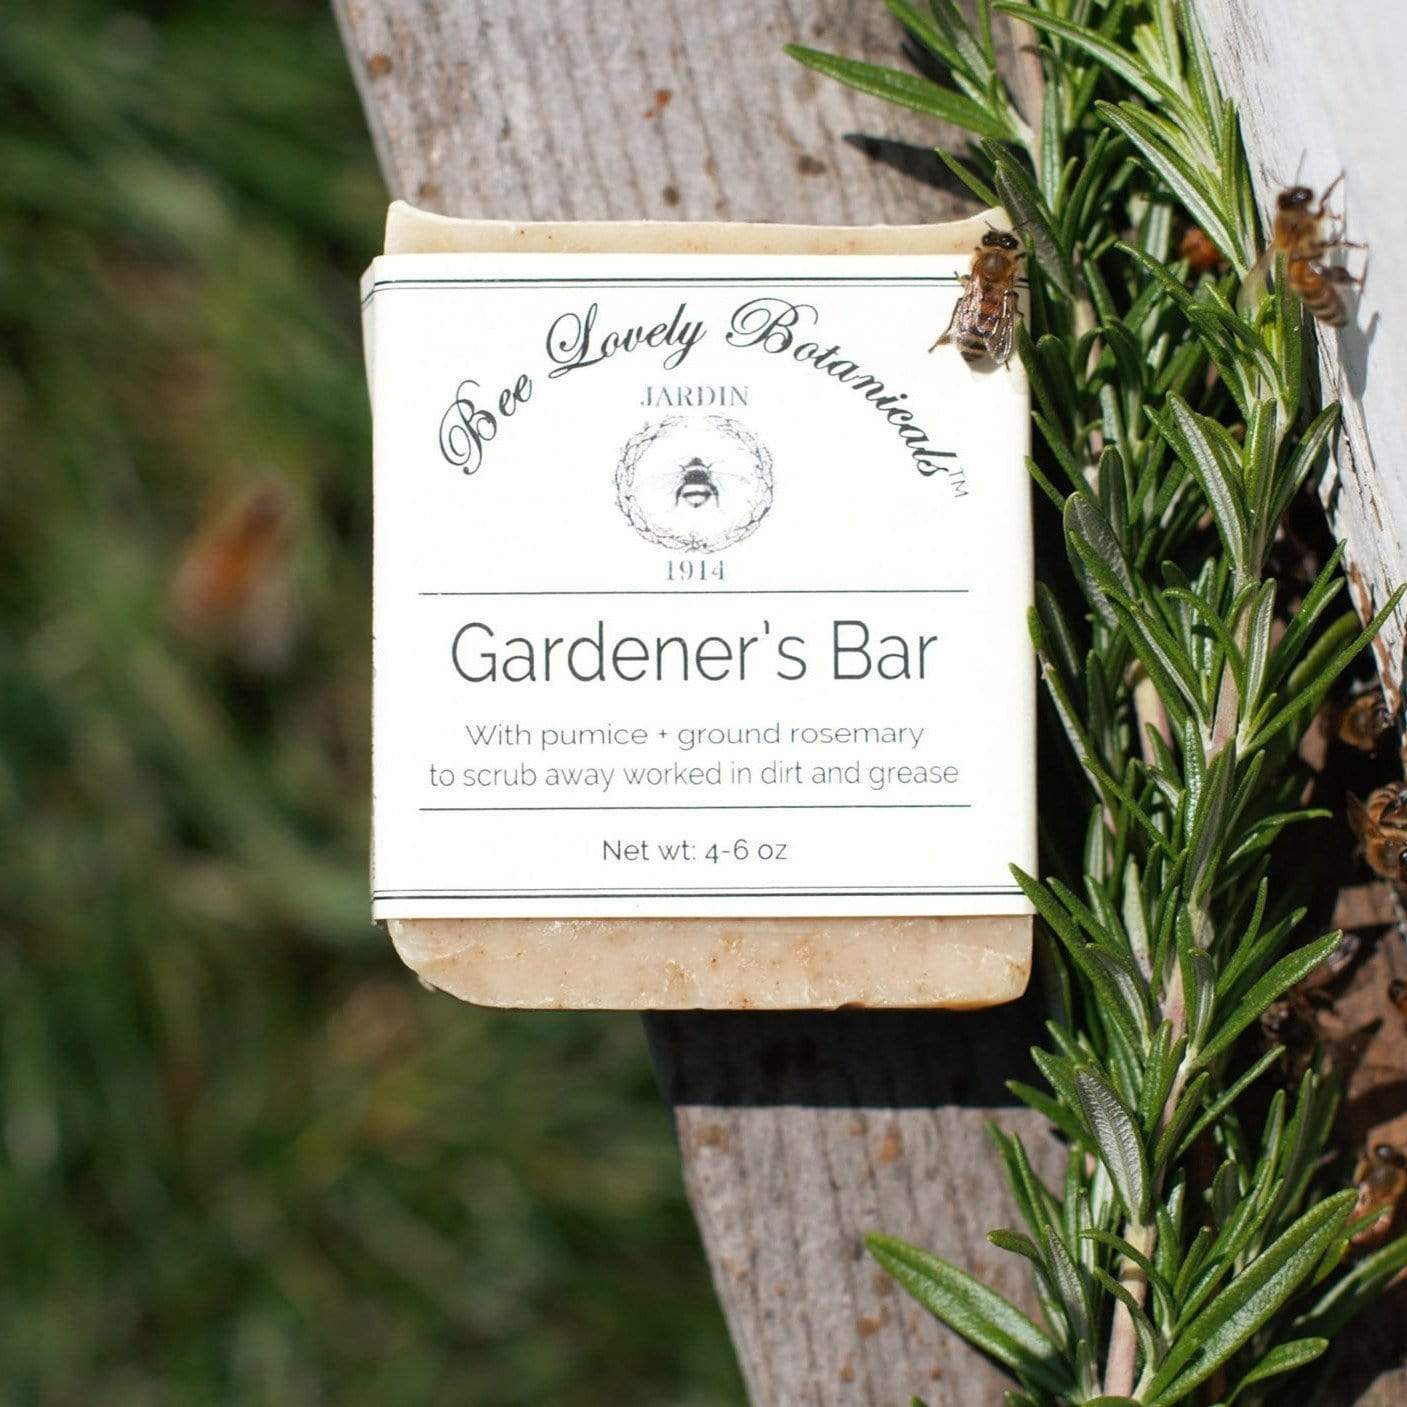 BeeLovelyBotanicals Gardener's Bar Soap with Pumice and Ground Rosemary